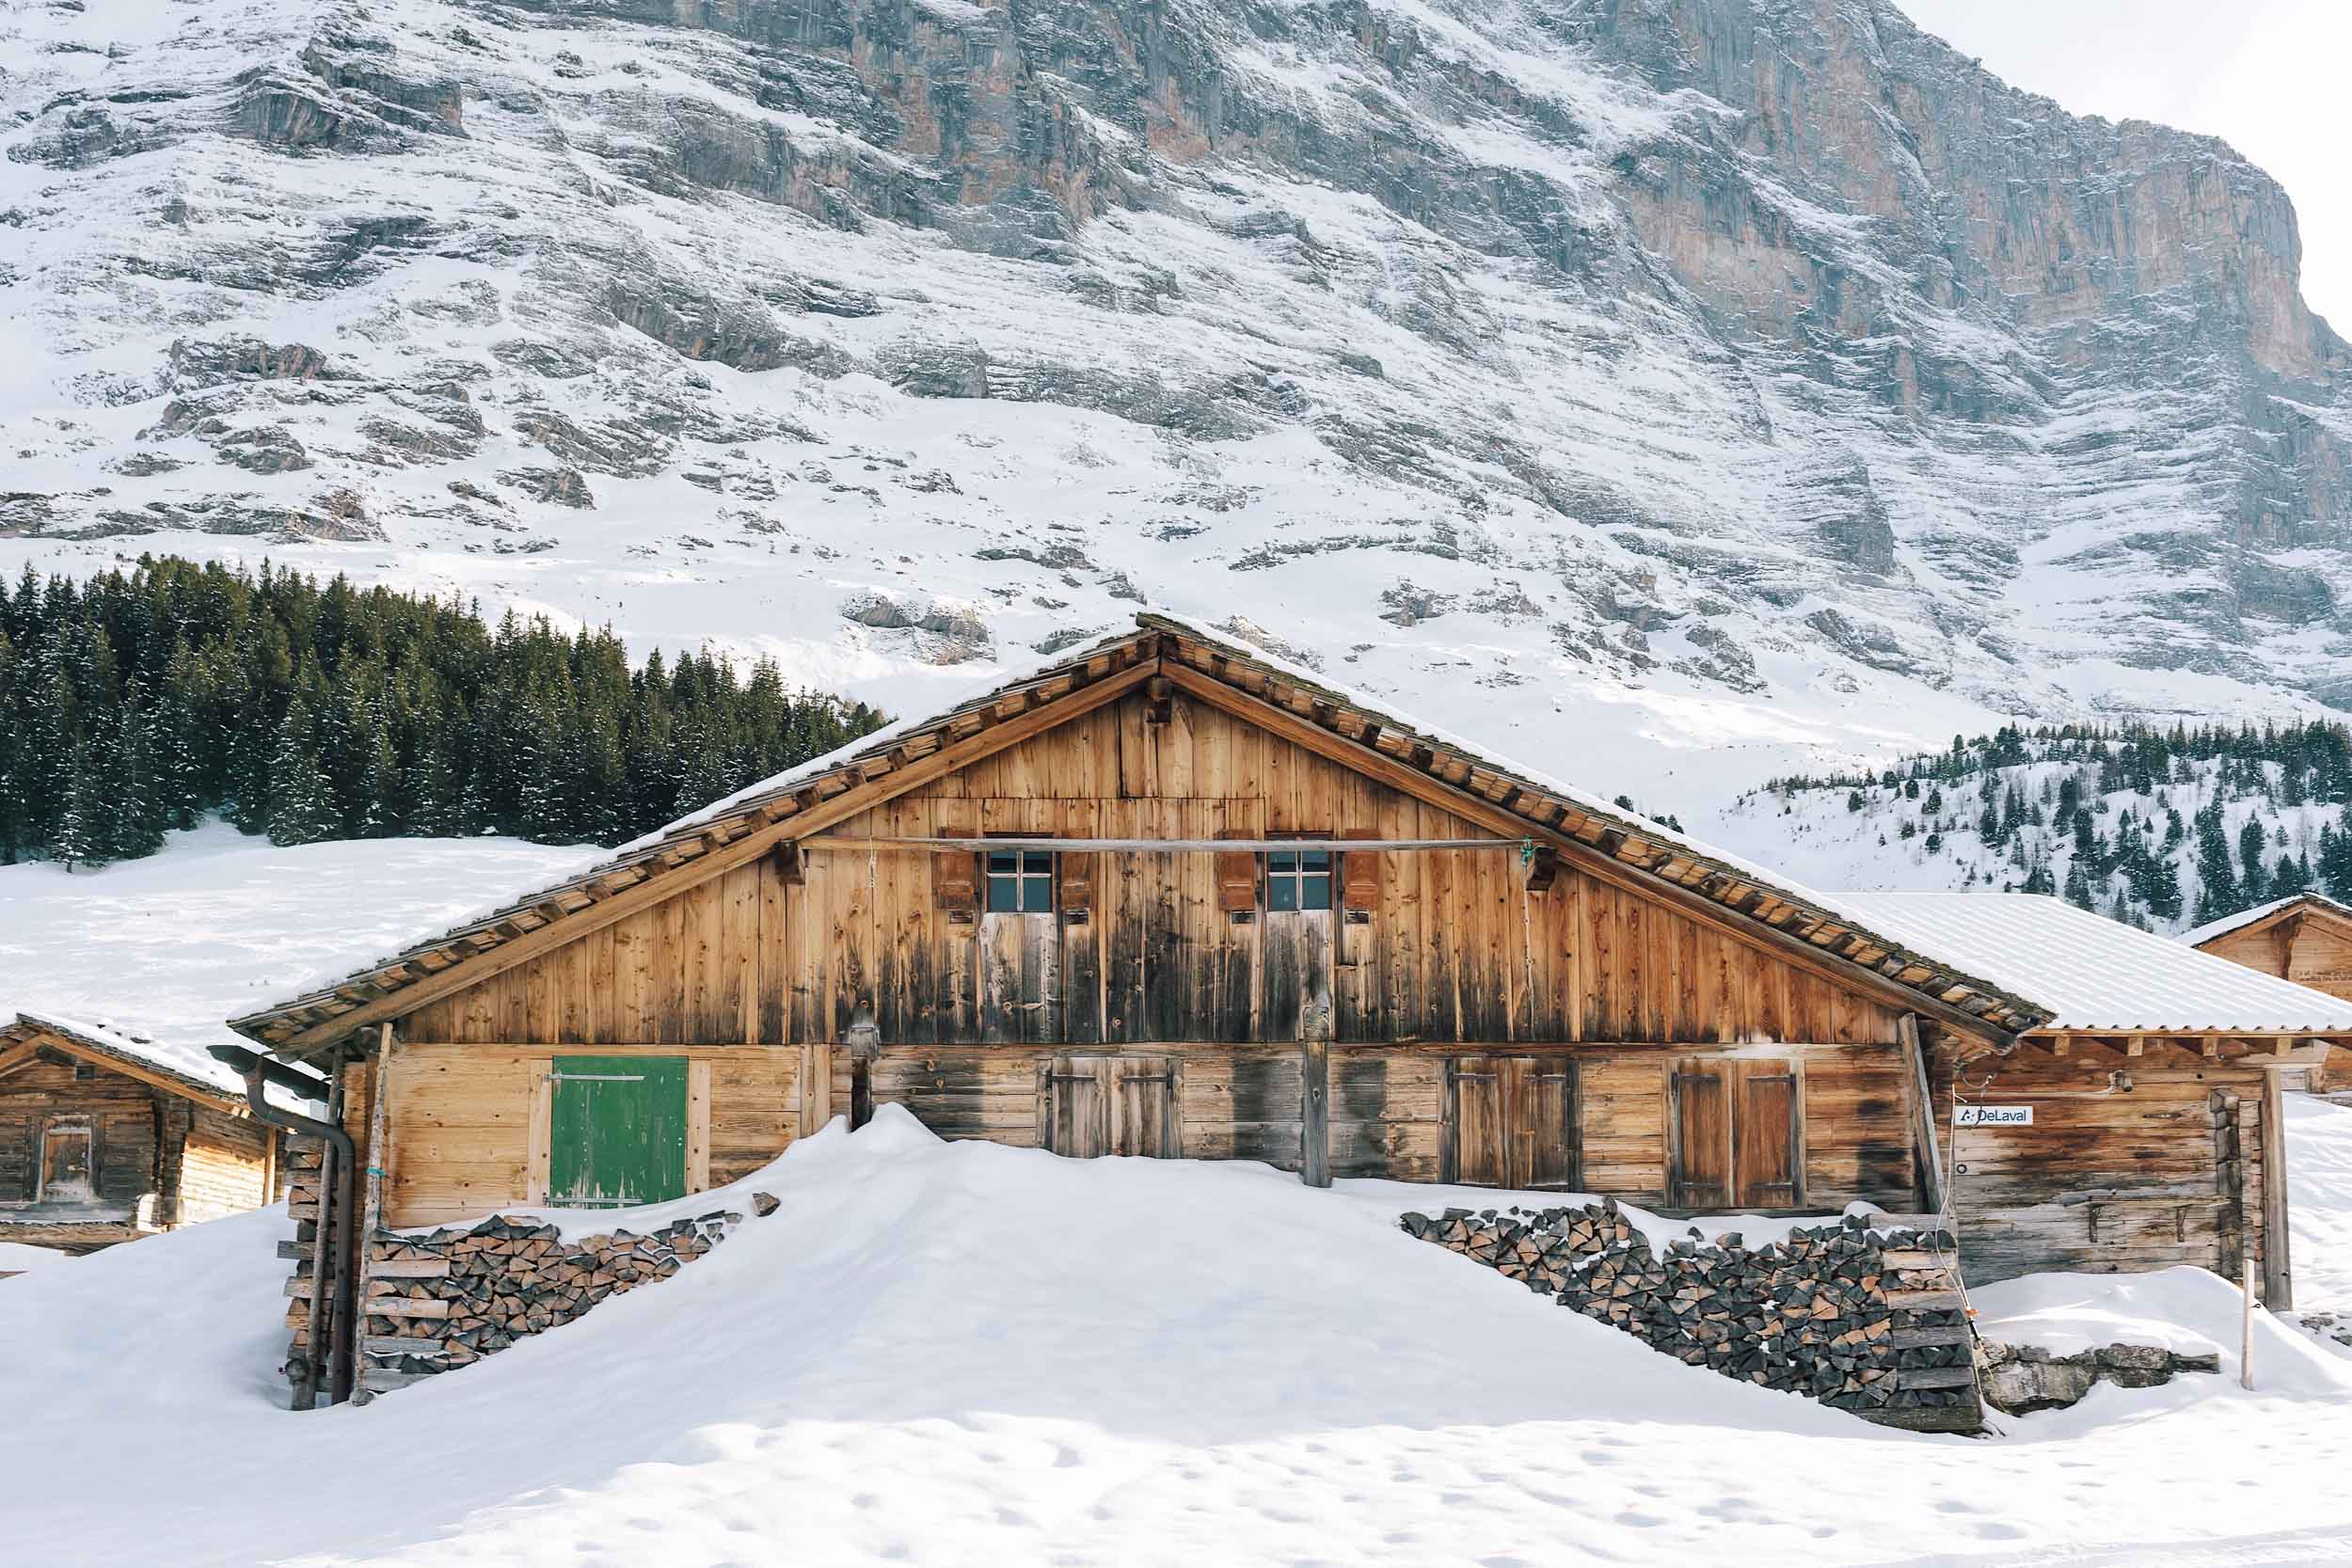 A beautiful log cabin below the famous north face of Eiger